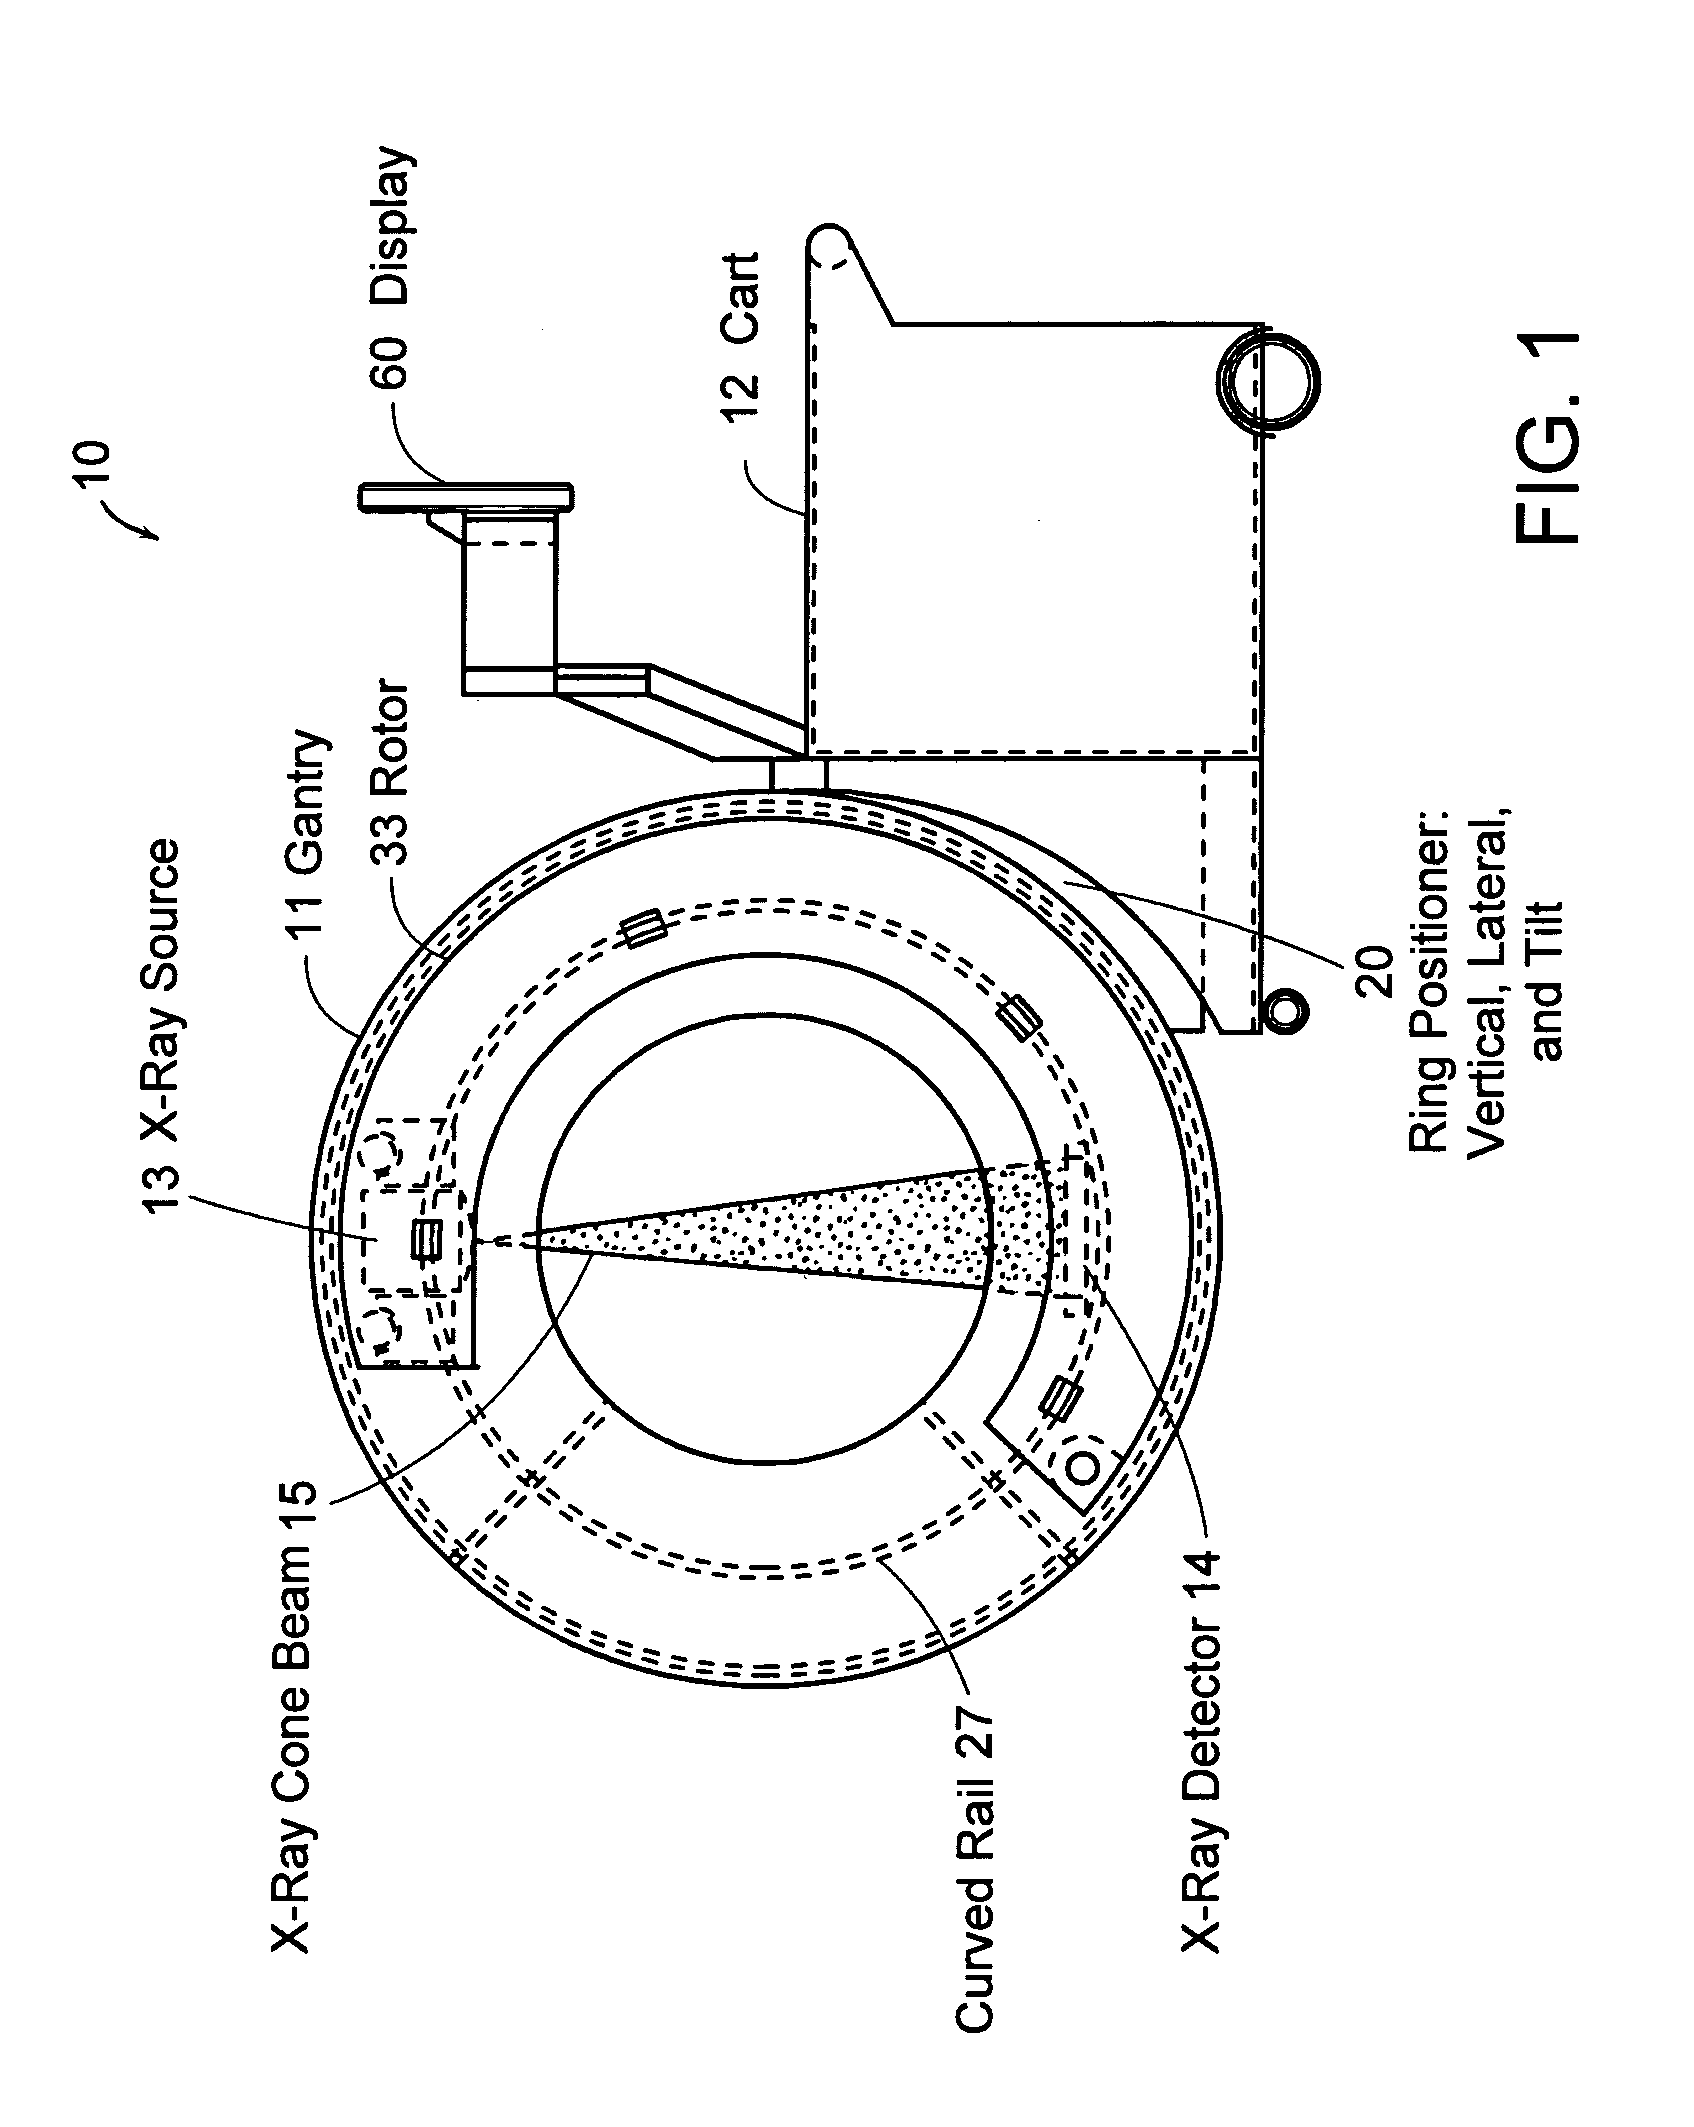 Systems and methods for quasi-simultaneous multi-planar x-ray imaging